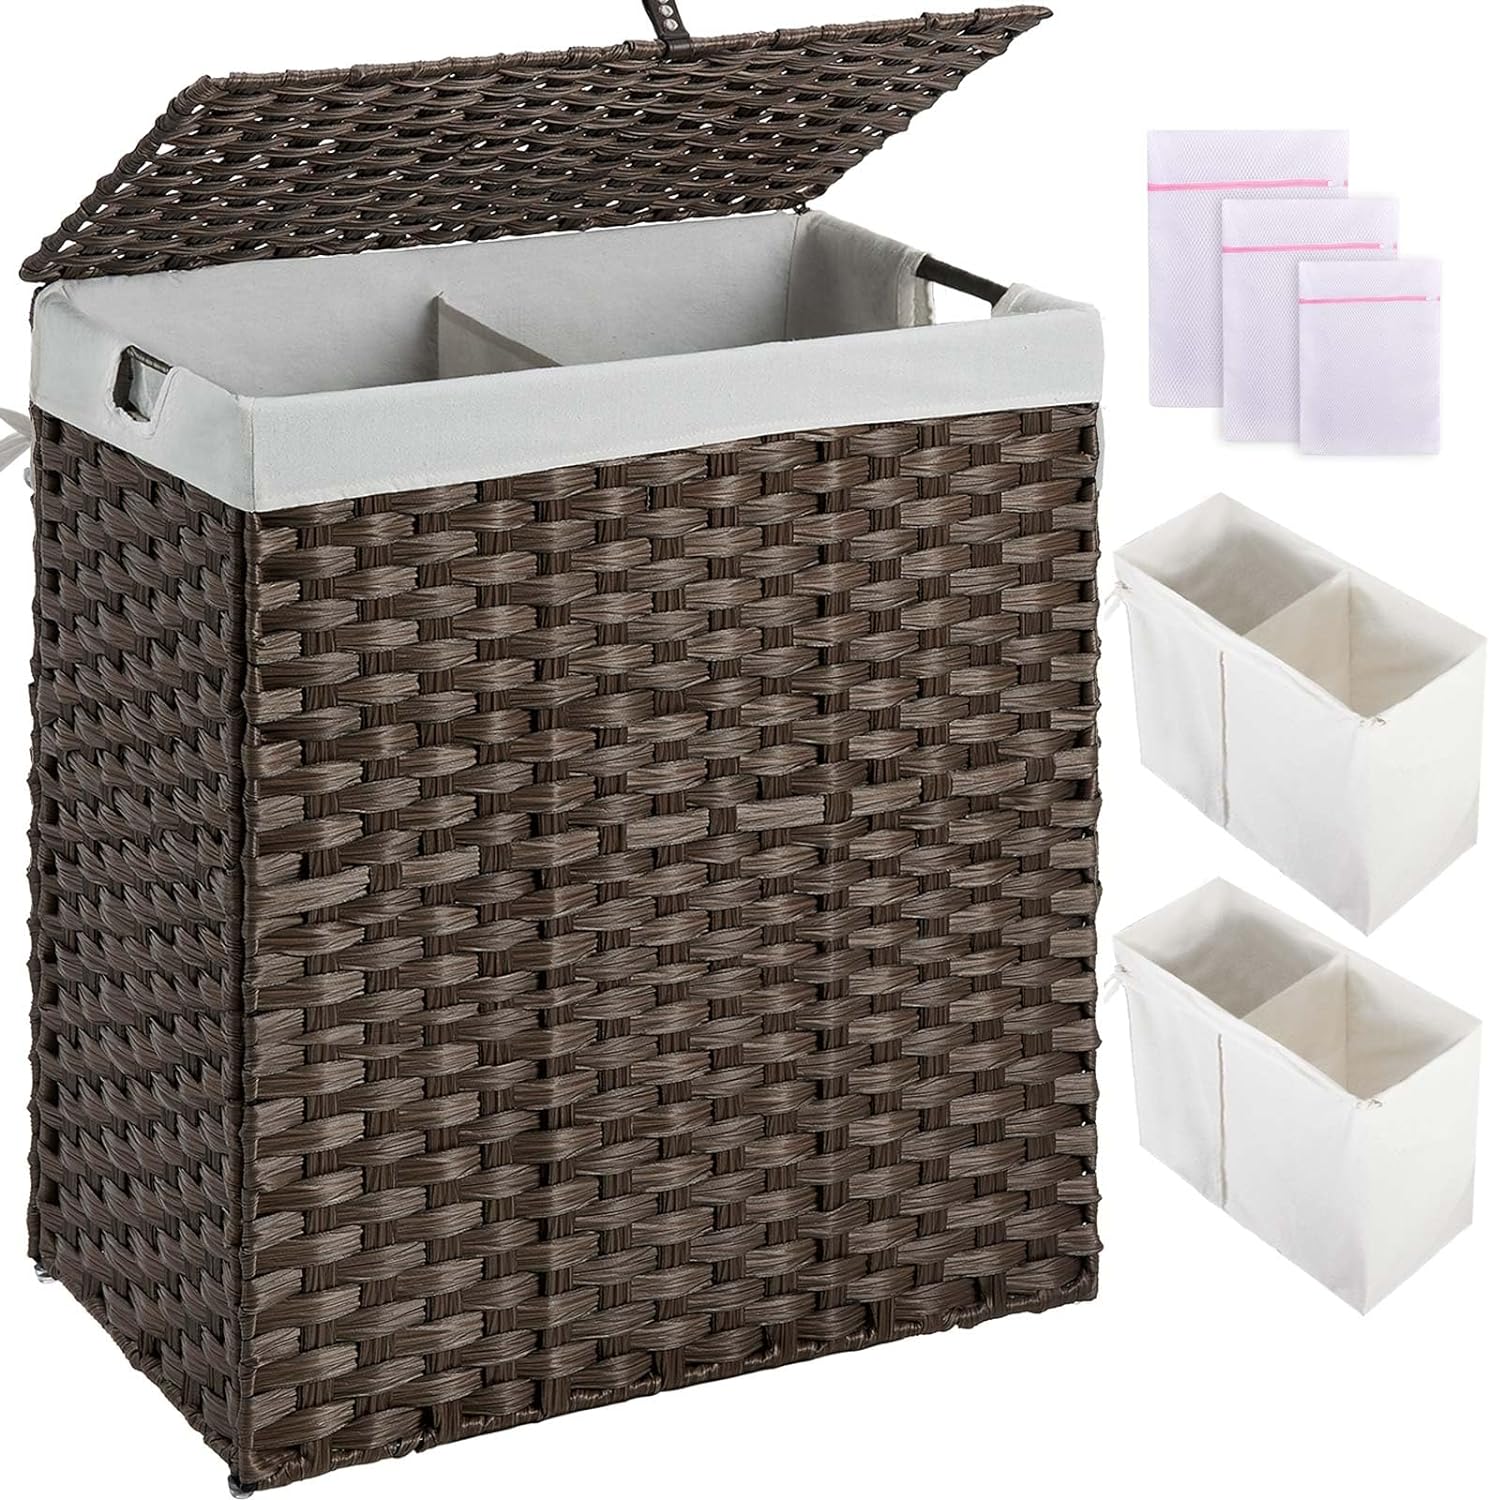 GREENSTELL Laundry Hamper with lid, No Install Needed, 110L Wicker Laundry Baskets Foldable 2 Removable Liner Bags, 2 Section Clothes Hamper Handwoven Rattan Laundry Basket with Handles, Brown